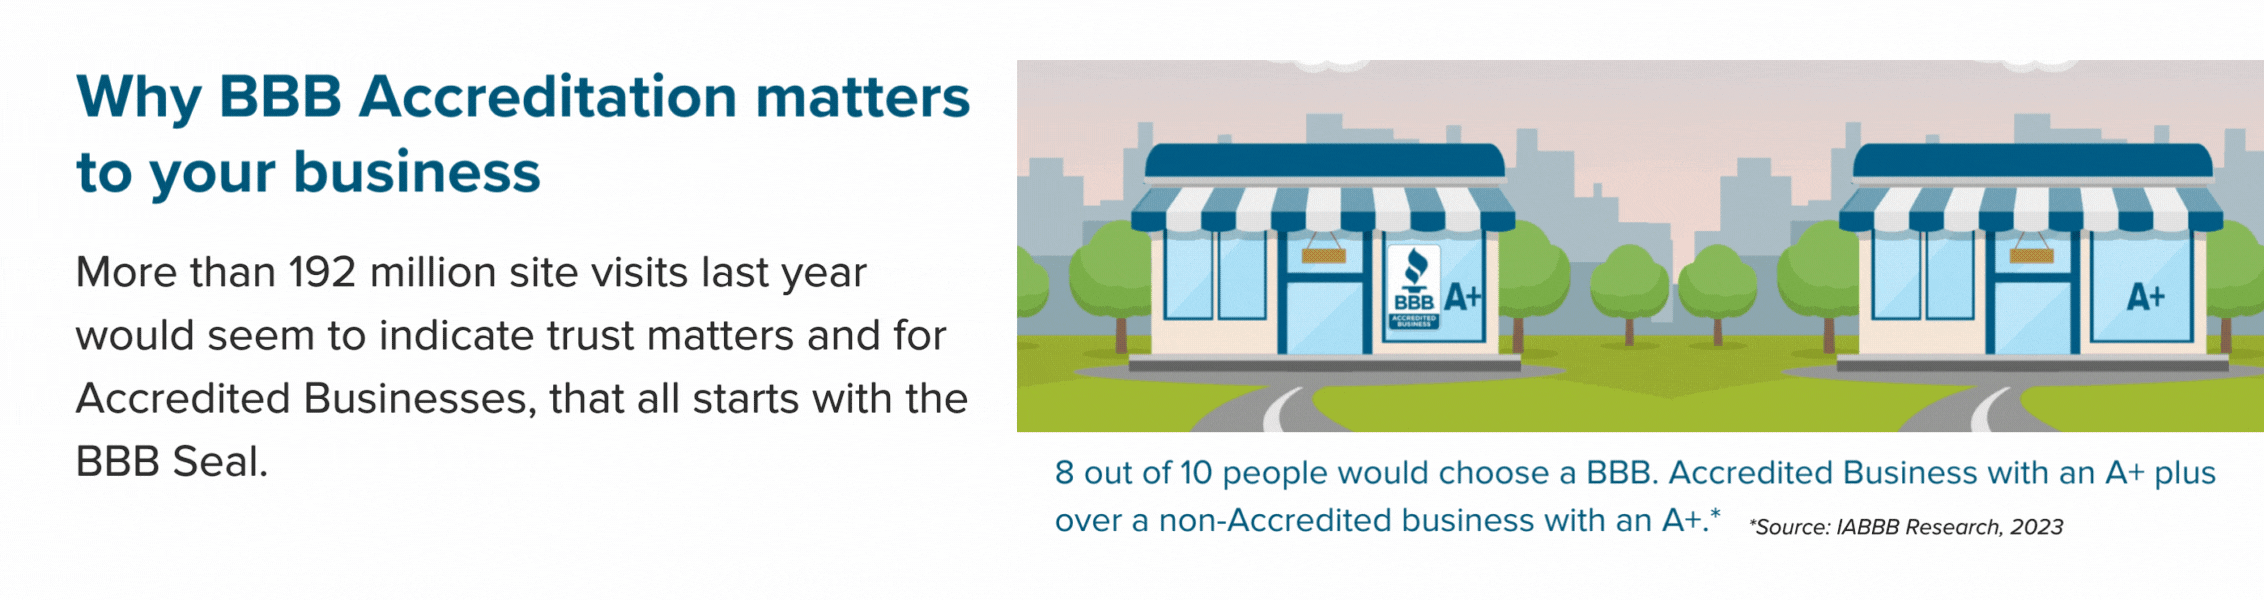 Why BBB Accreditation matters to your business; More than 192 million site visits last year would seem to indicate trust matters and for Accredited Businesses, that all starts with the BBB Seal.; 8 out 0f 10 people said they would do business with a BBB Accredited business with an A+ over a non-Accredited business with an A+ 